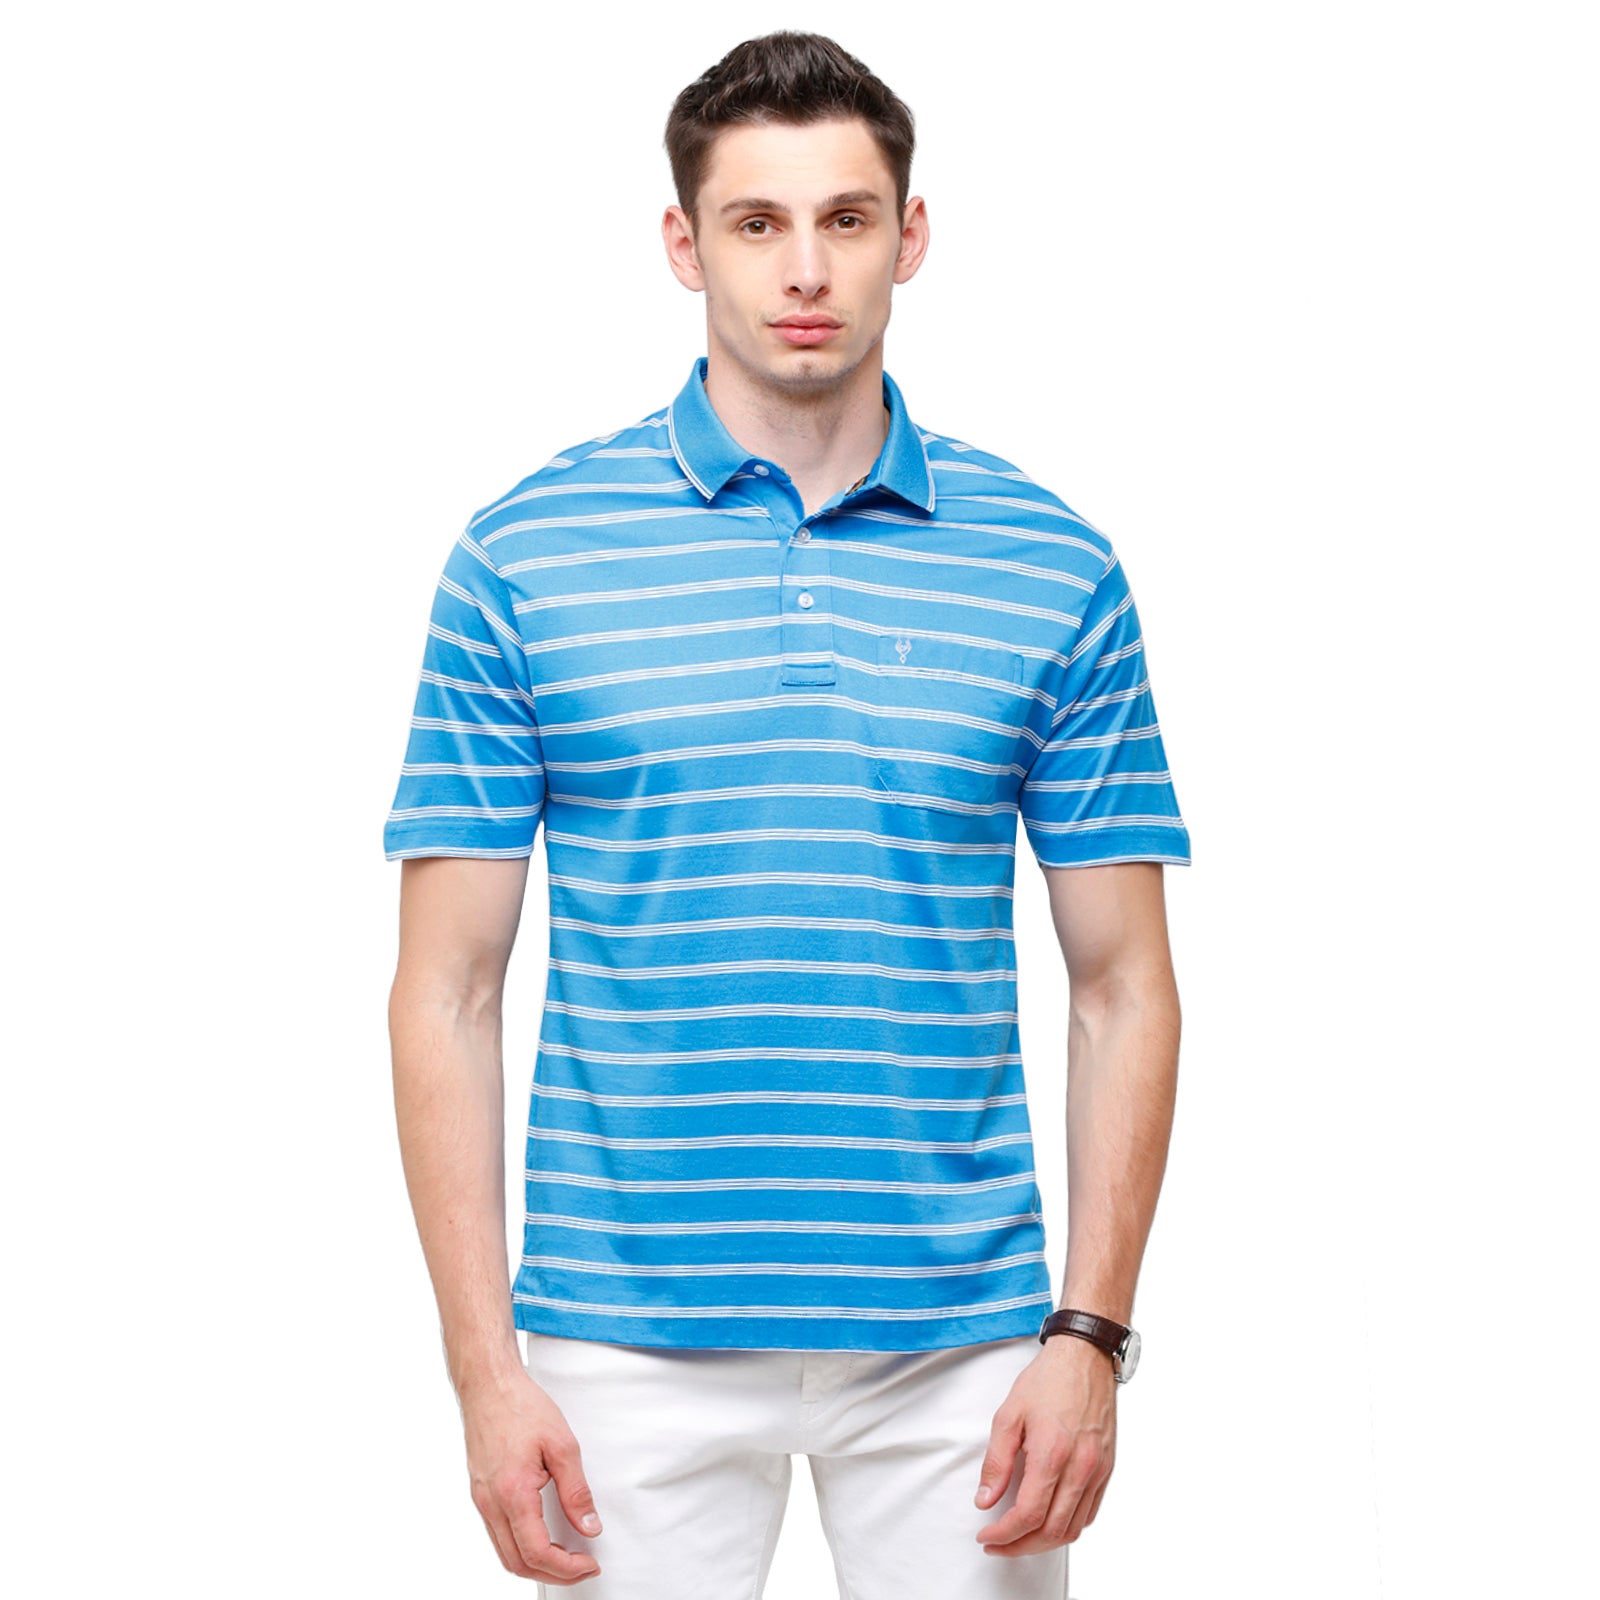 Classic Polo Men's Striped Authentic Fit Half Sleeve Premium Turquoise Stripe T-Shirt - Ultimo - 253 B T-shirt Classic Polo 